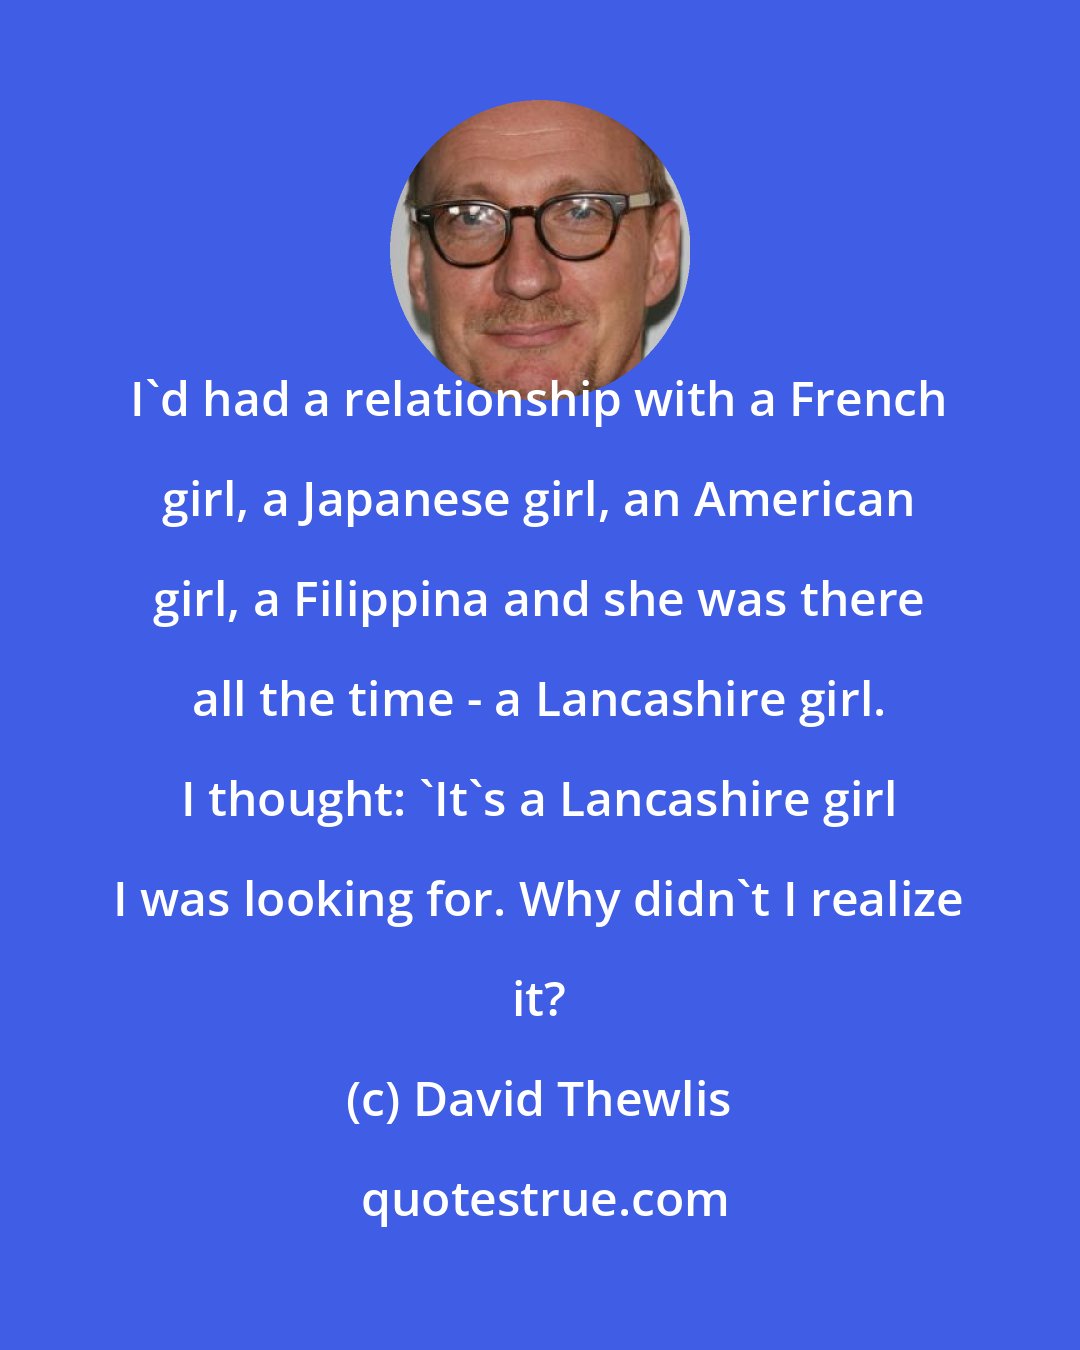 David Thewlis: I'd had a relationship with a French girl, a Japanese girl, an American girl, a Filippina and she was there all the time - a Lancashire girl. I thought: 'It's a Lancashire girl I was looking for. Why didn't I realize it?